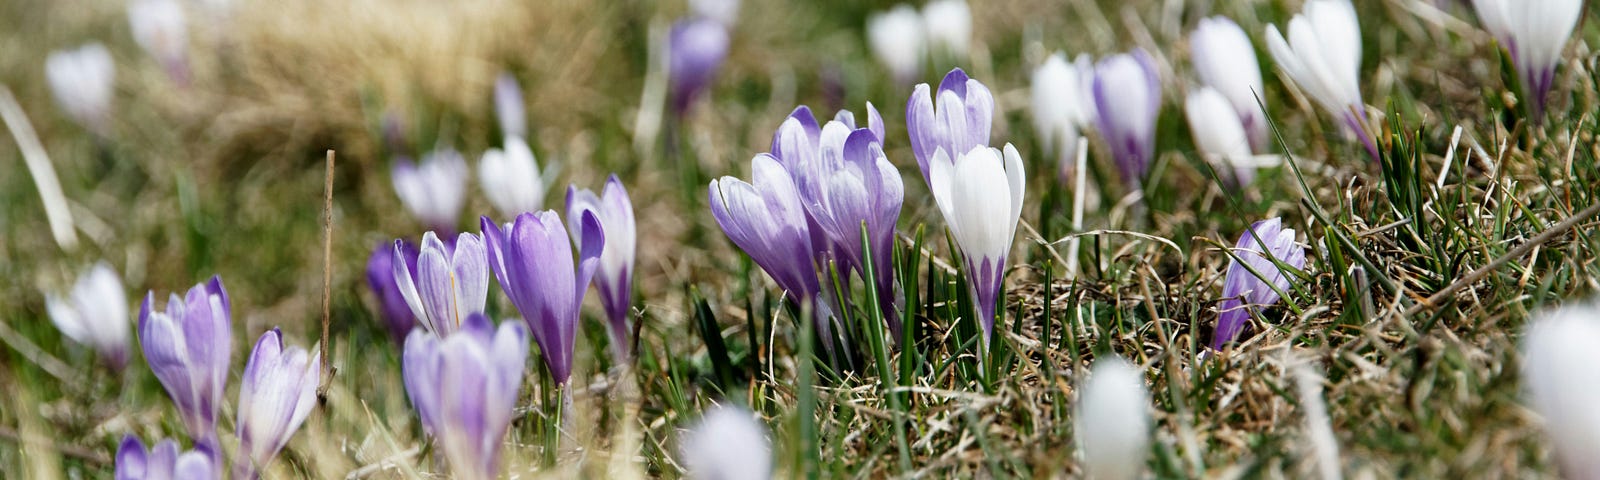 Purple flowers growing on the grass